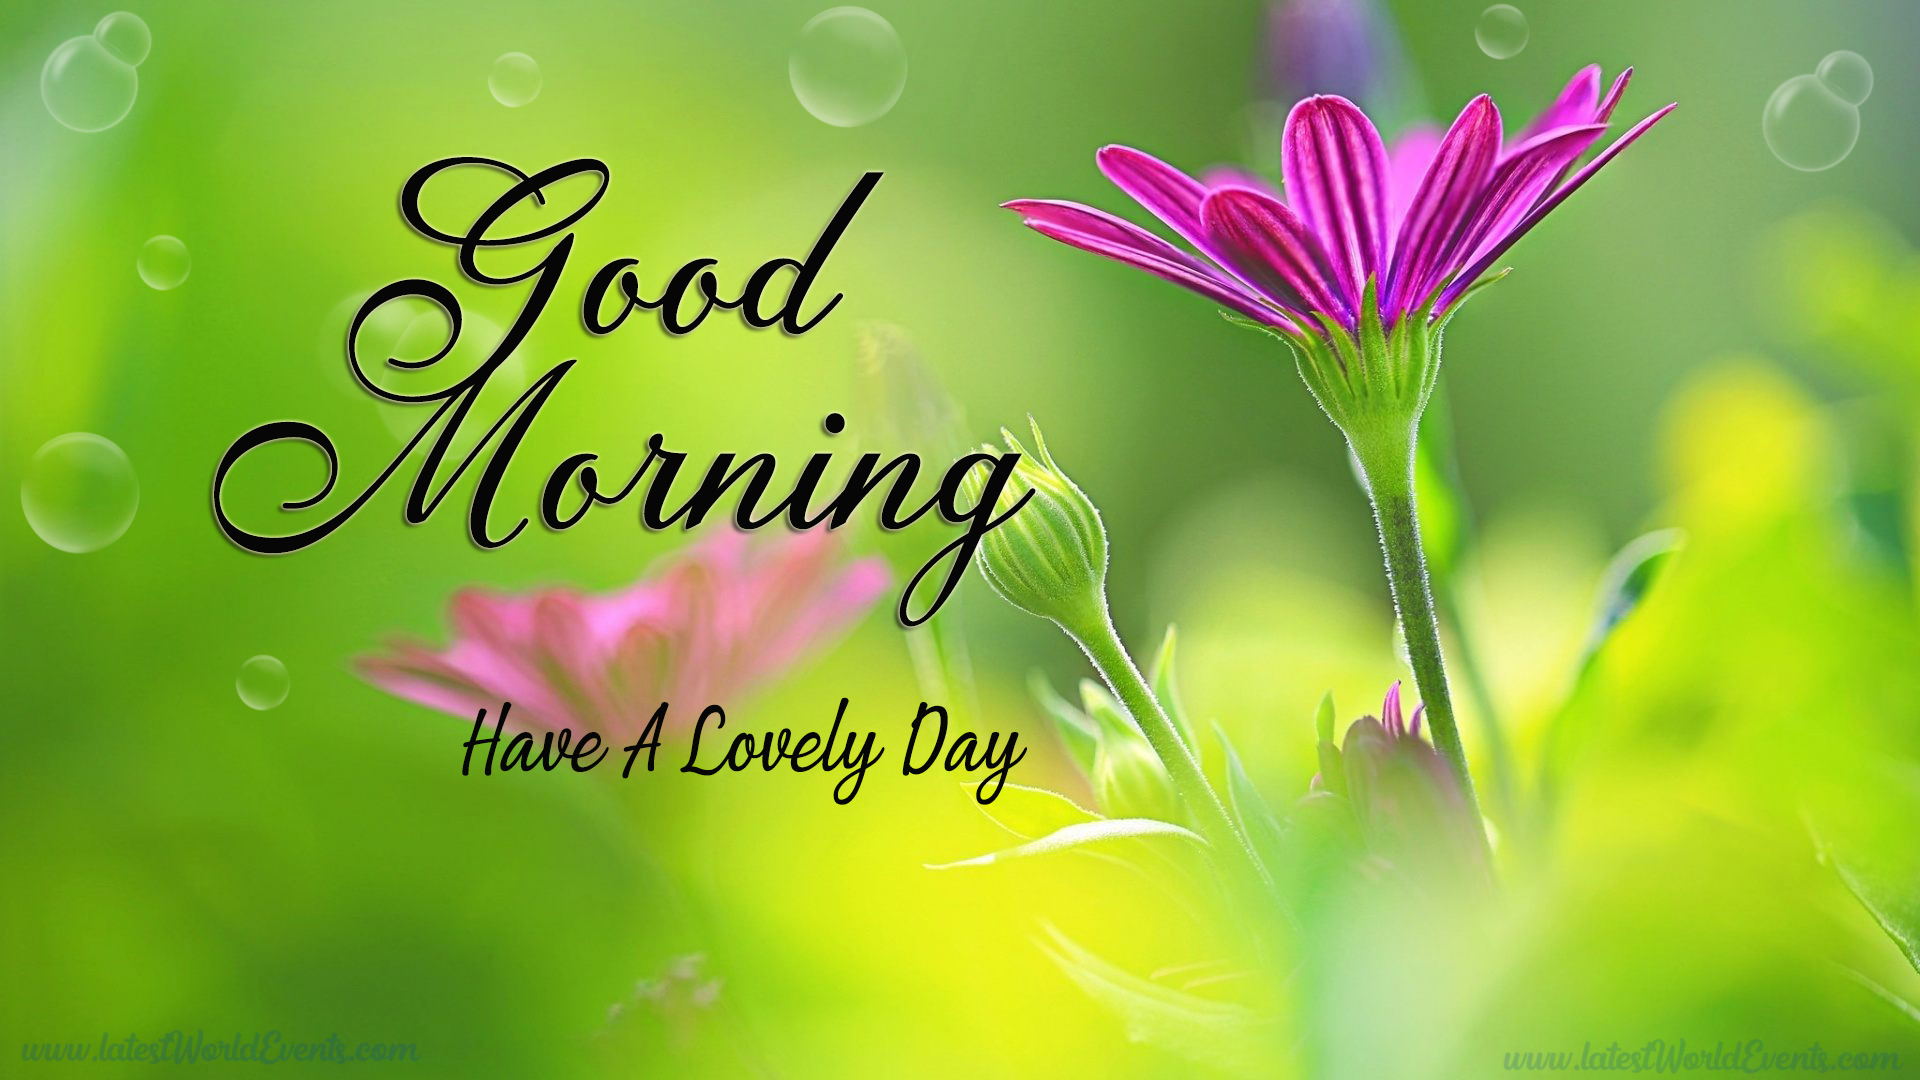 good-morning-wishes-for-friends